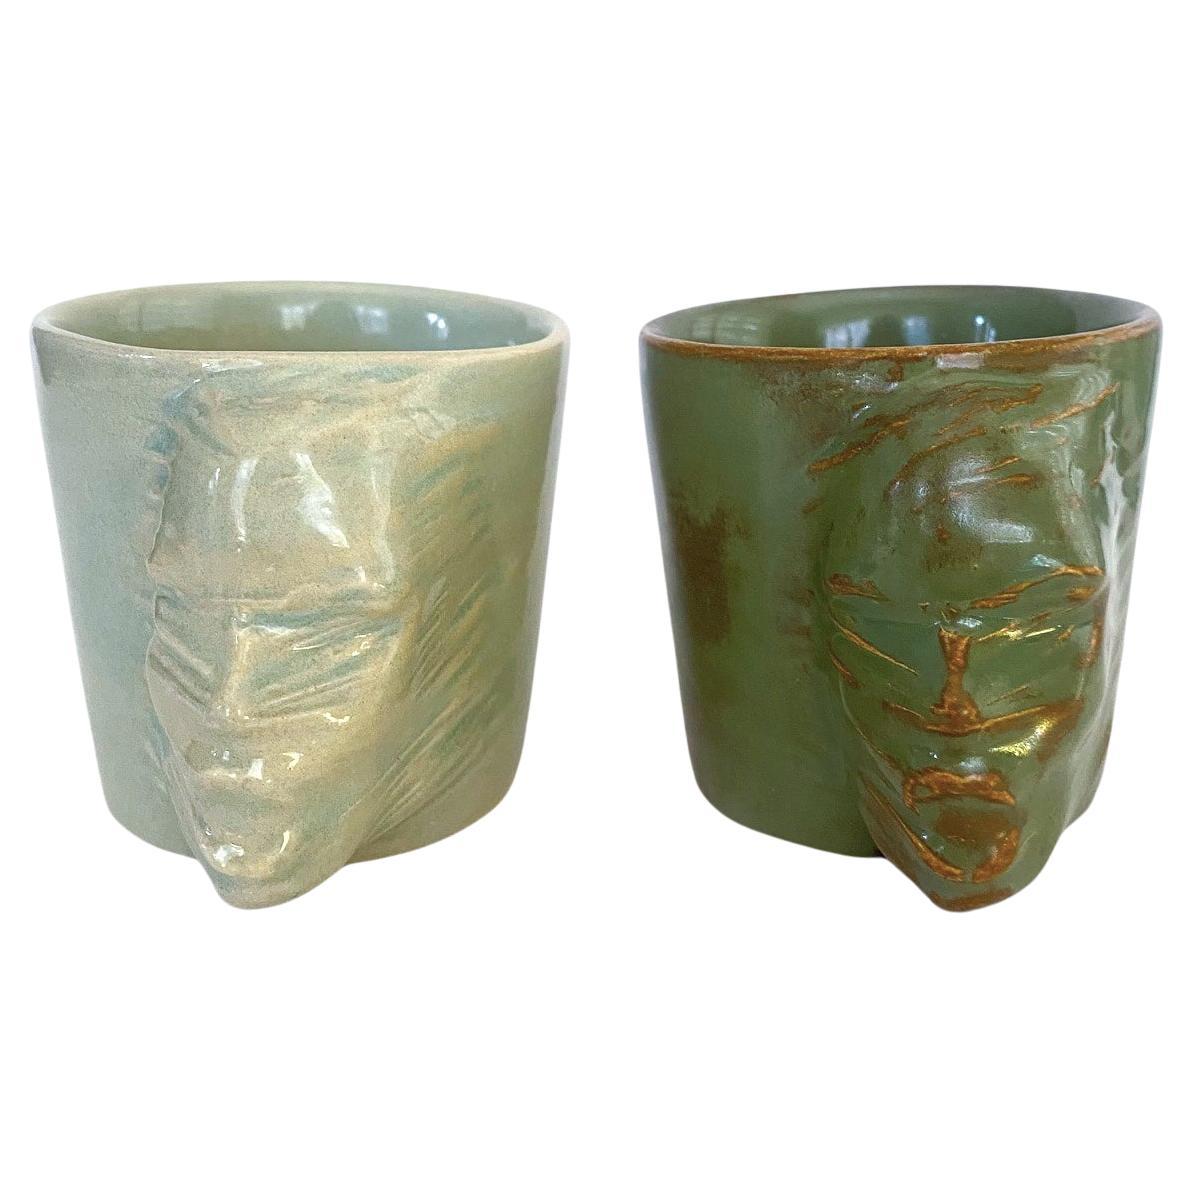 Sculptural Ceramic Cups Set of 2 by Hulya Sozer, Face Silhouette, Earthly Greens For Sale